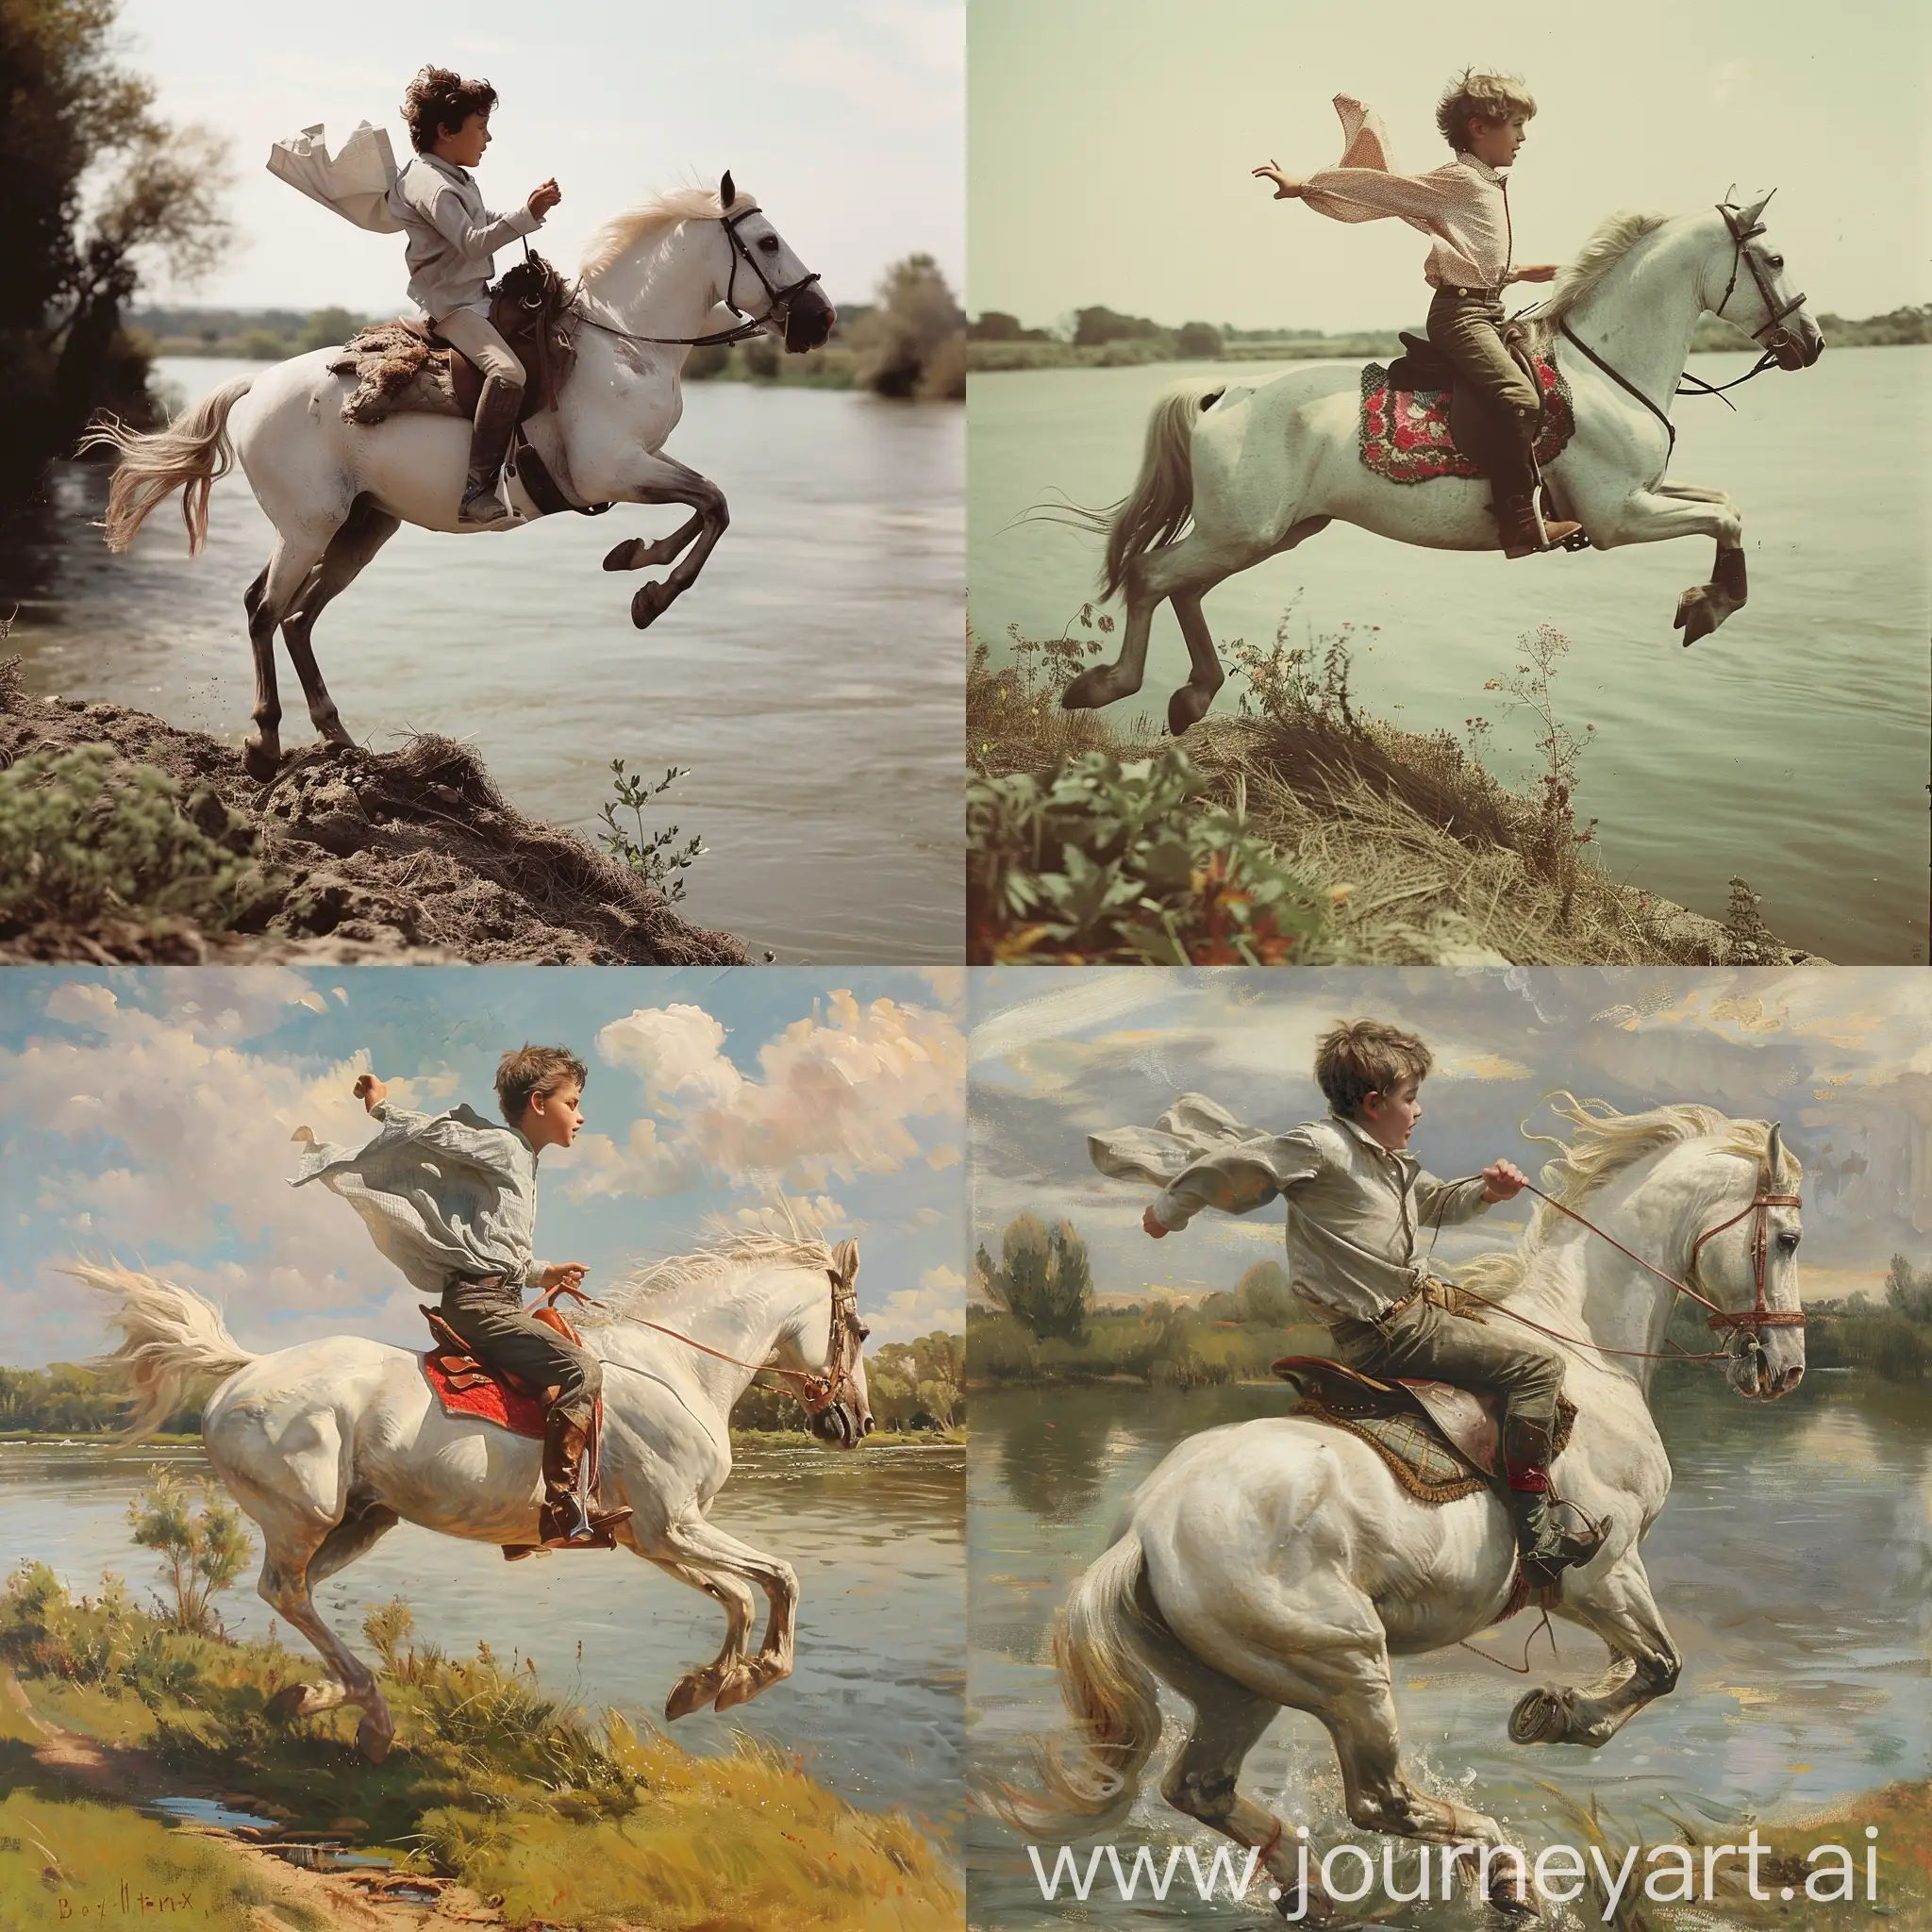 Energetic-12YearOld-Boy-Riding-a-White-Horse-Along-the-Riverbank-at-Noon